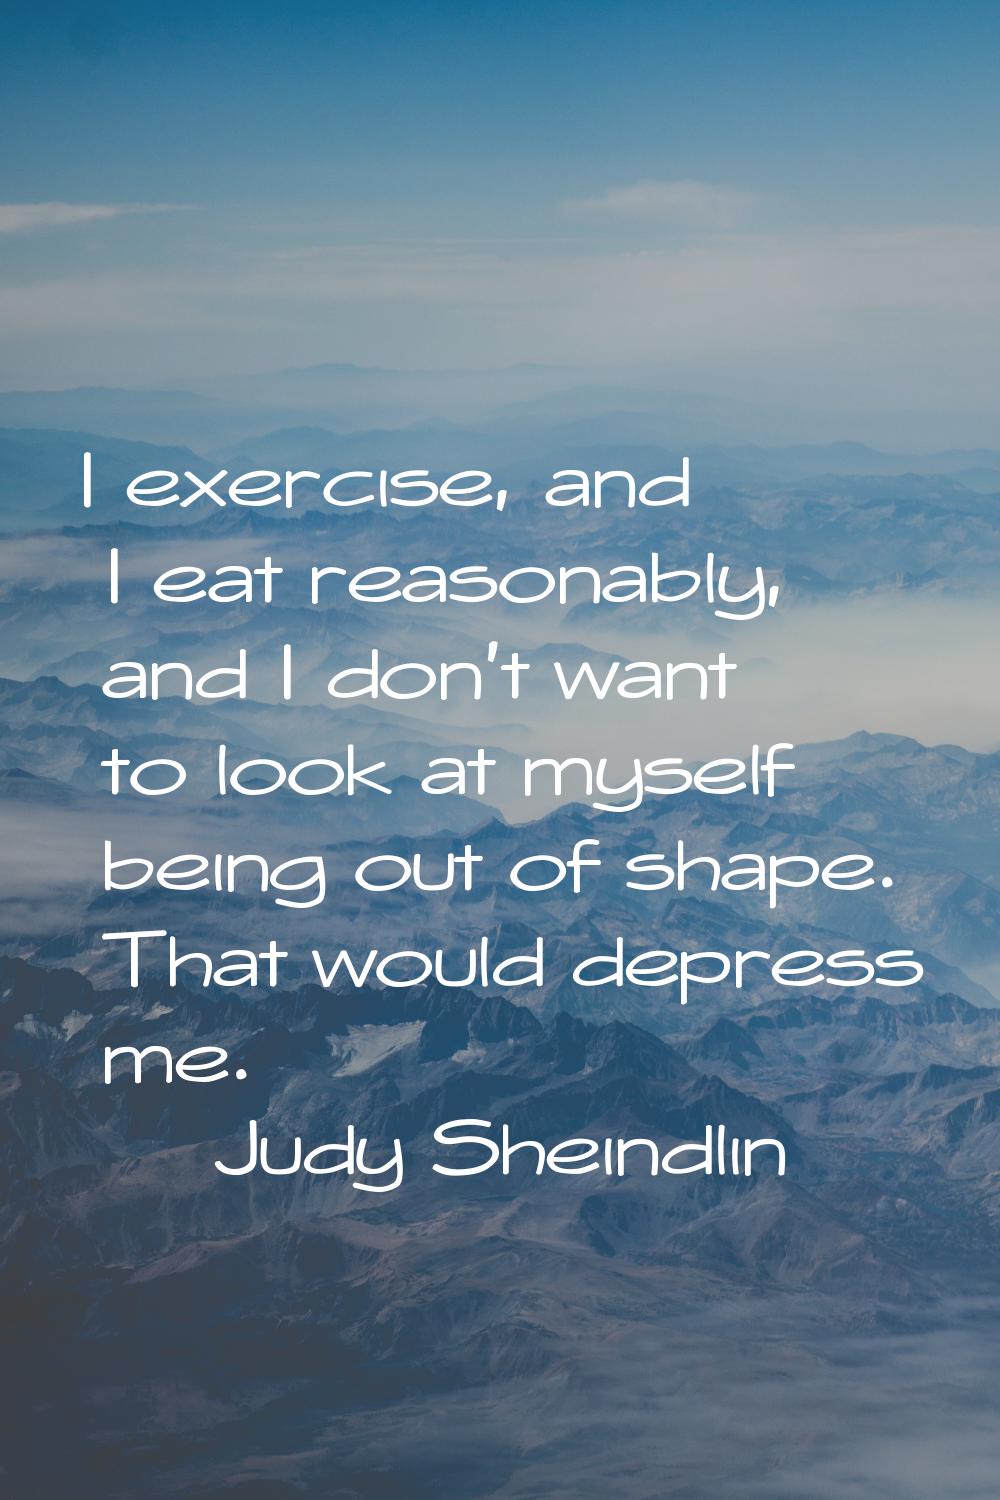 I exercise, and I eat reasonably, and I don't want to look at myself being out of shape. That would